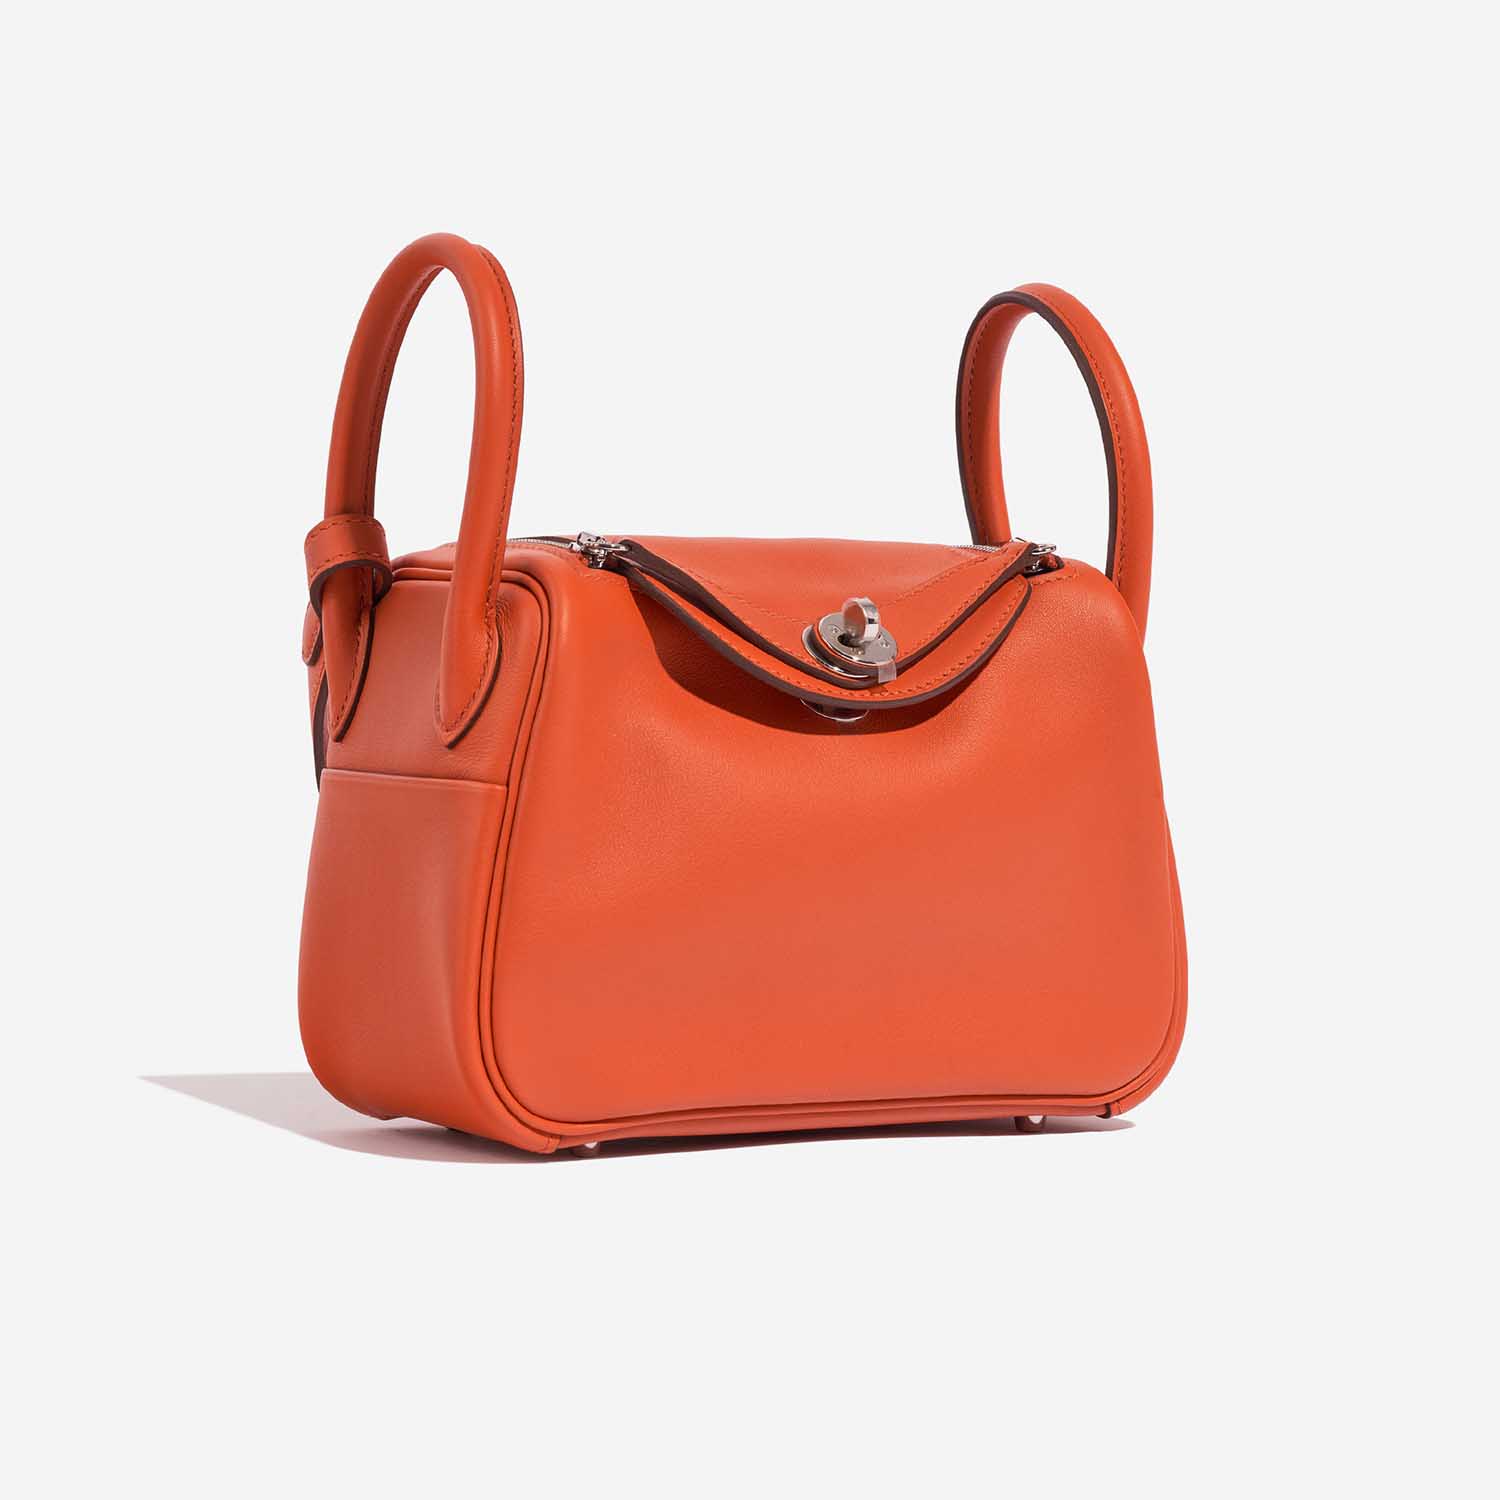 Shop HERMES Lindy 2020-21FW 3WAY Plain Leather Totes by sunnyfunny